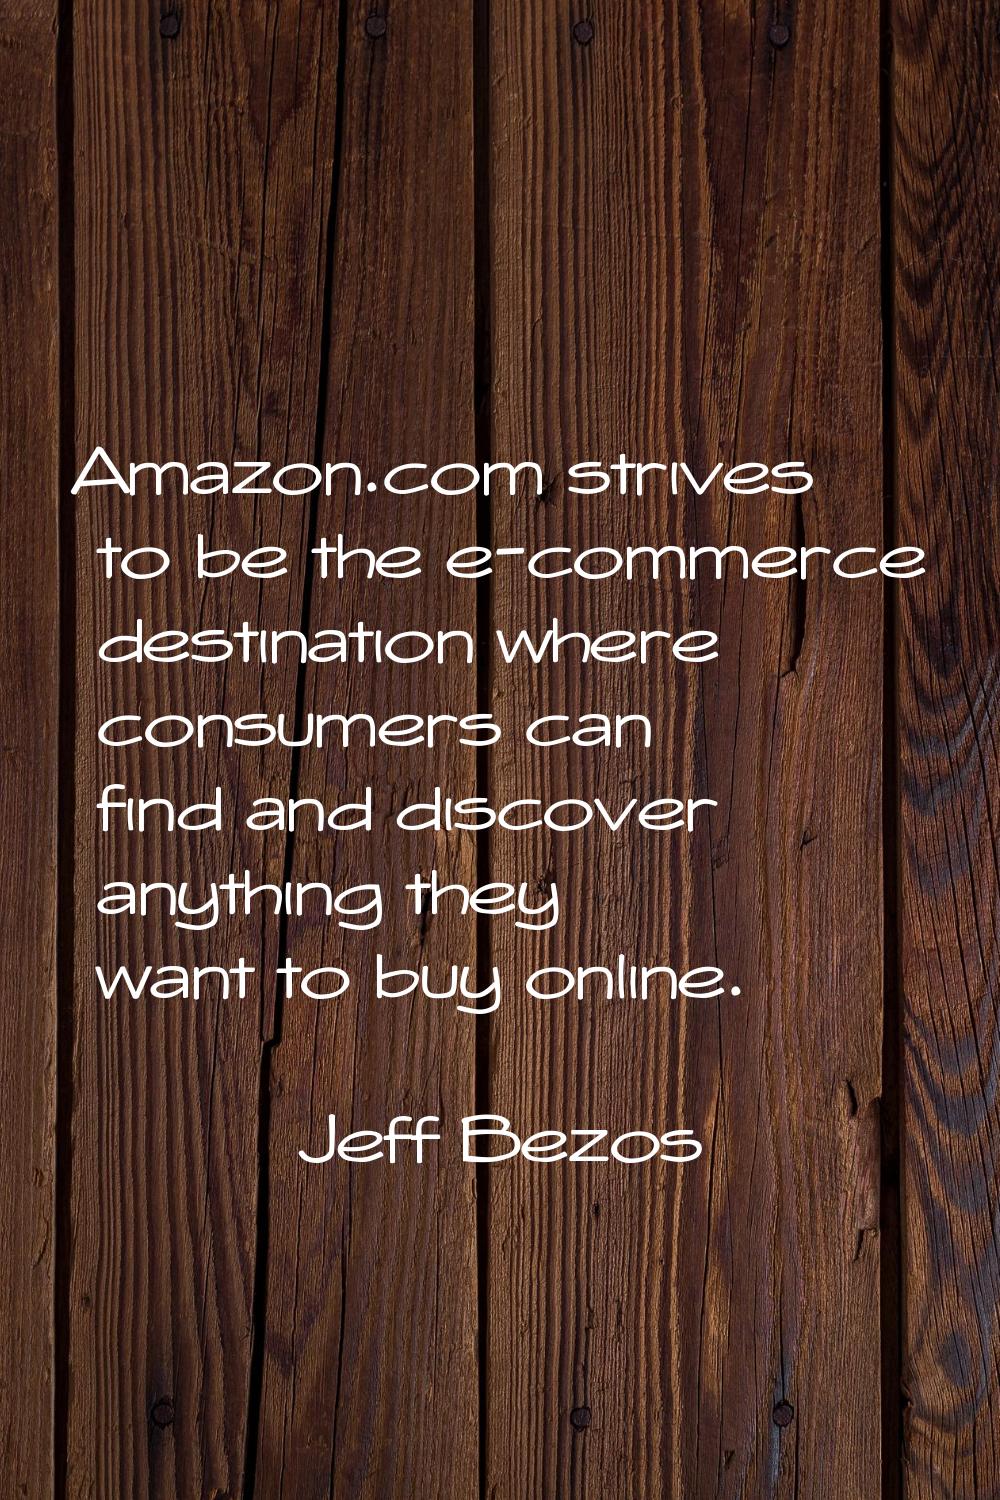 Amazon.com strives to be the e-commerce destination where consumers can find and discover anything 